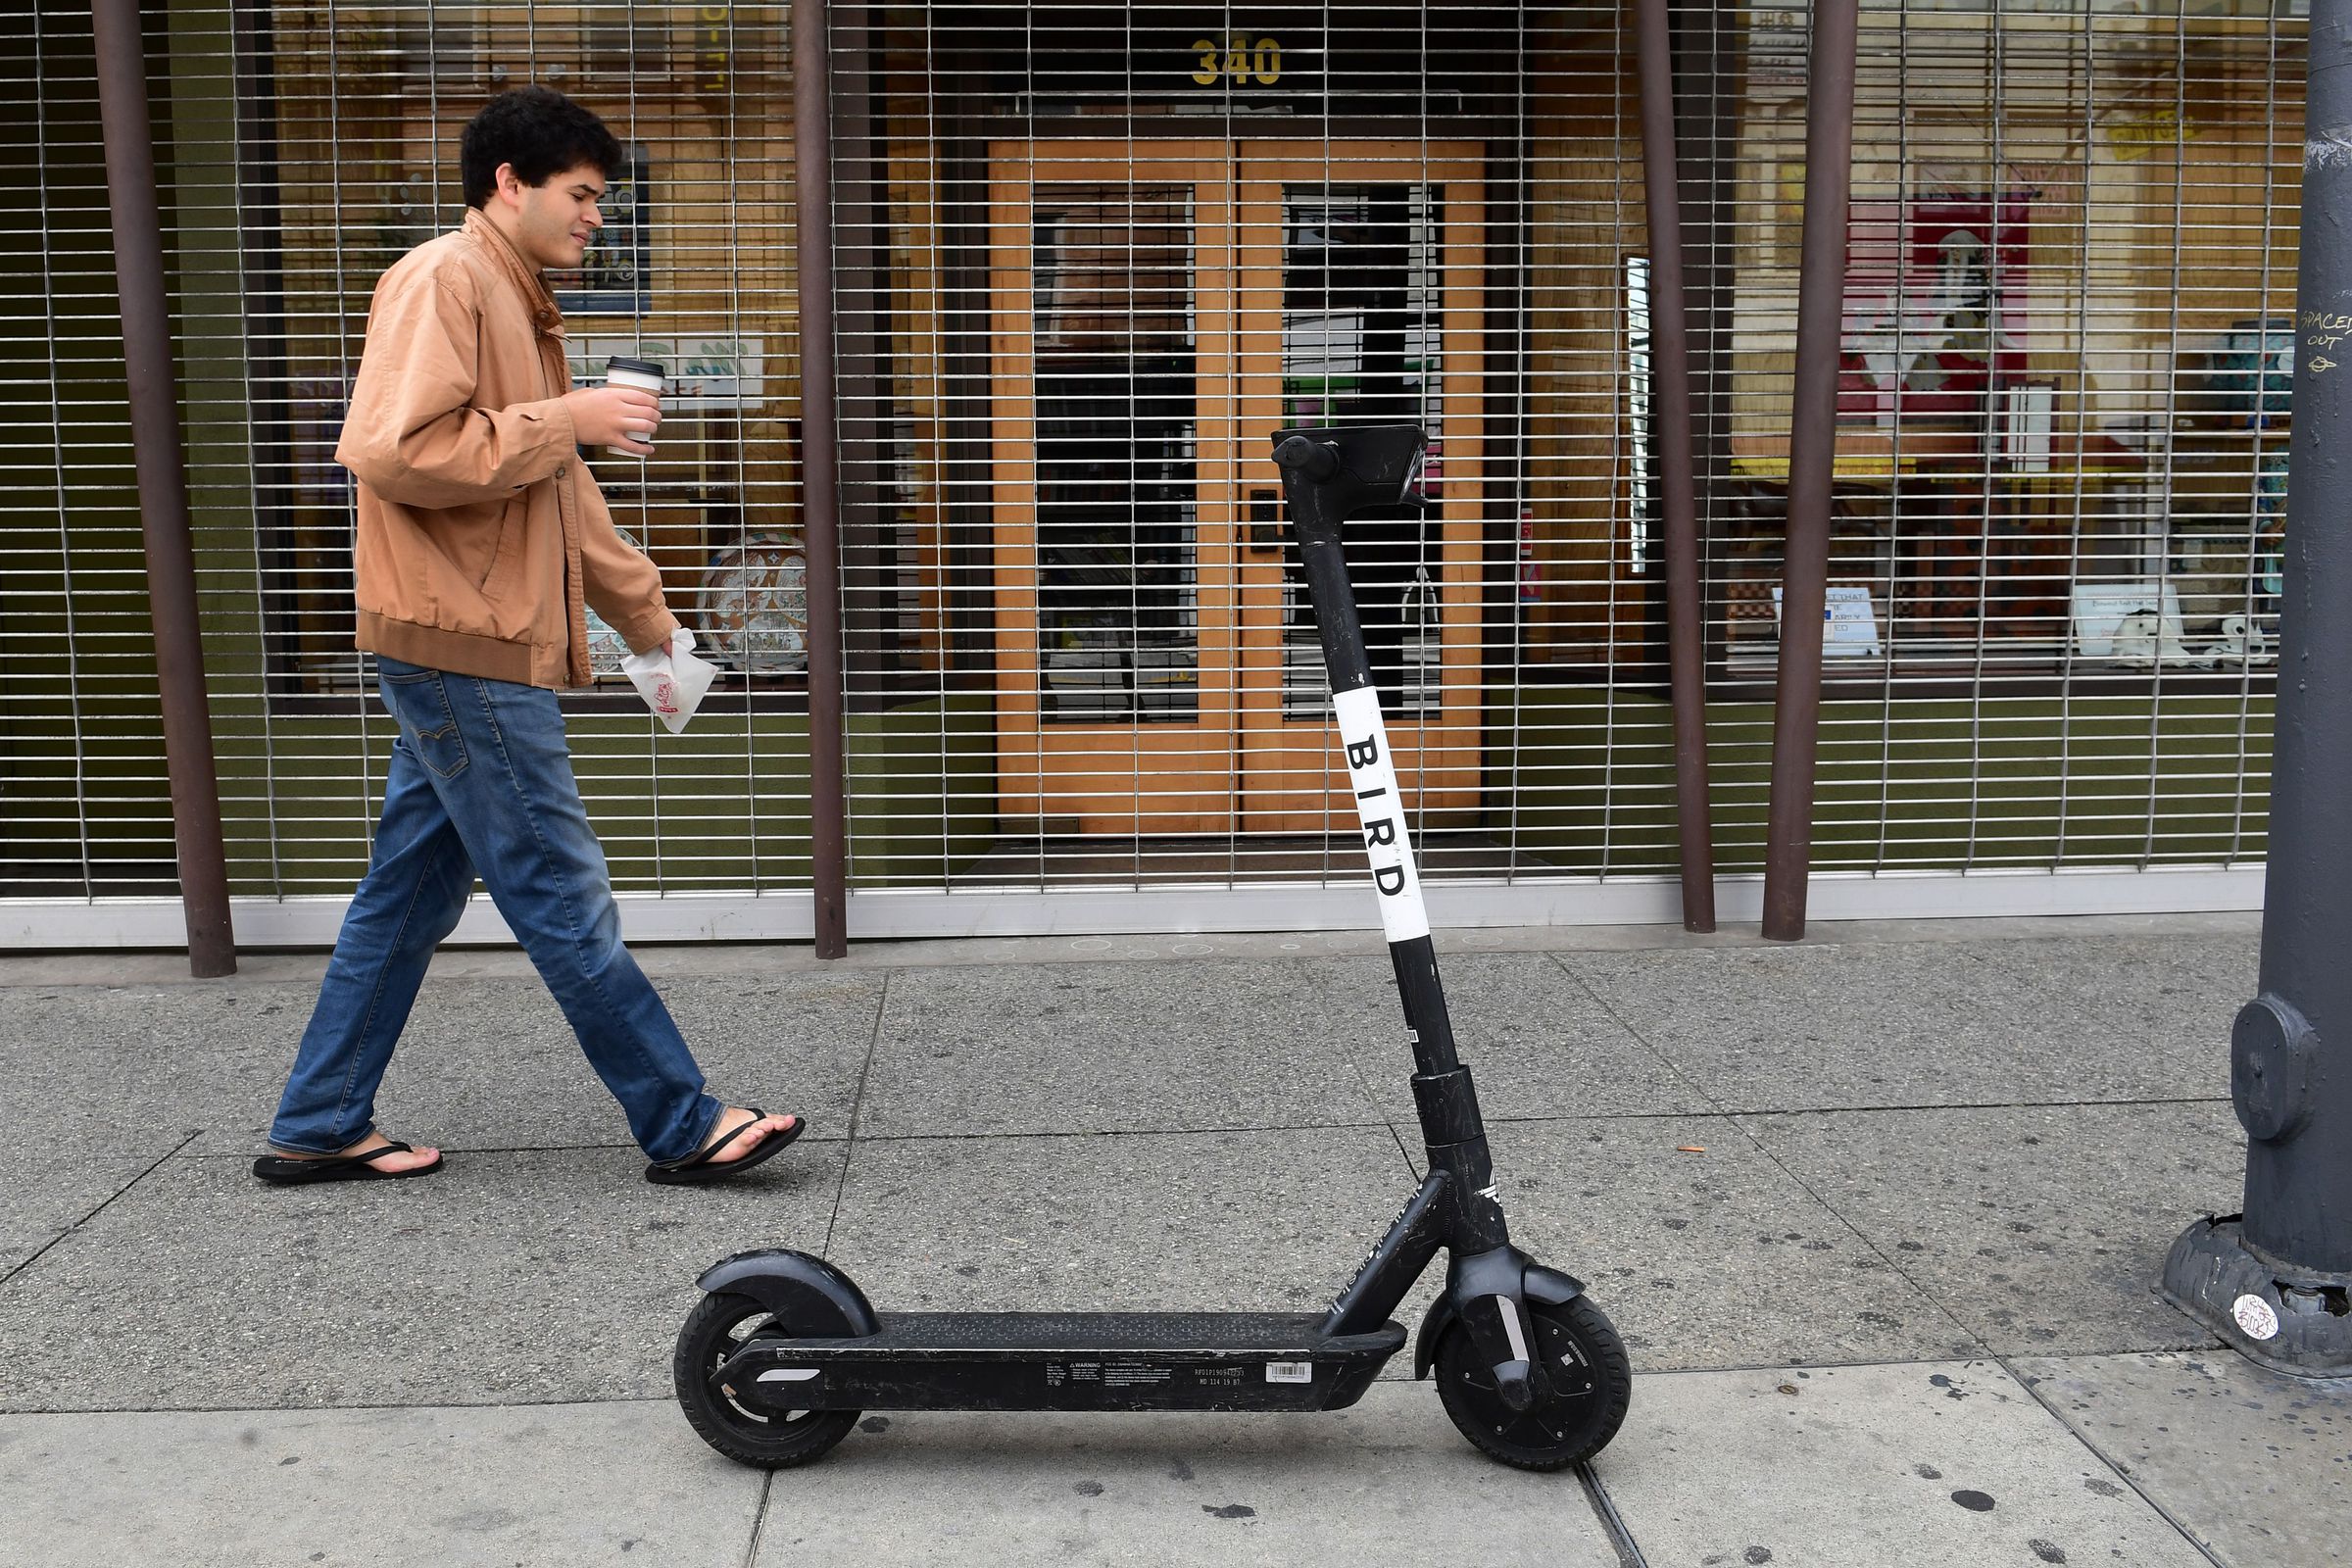 US-HEALTH-VIRUS-LIME-SCOOTERS